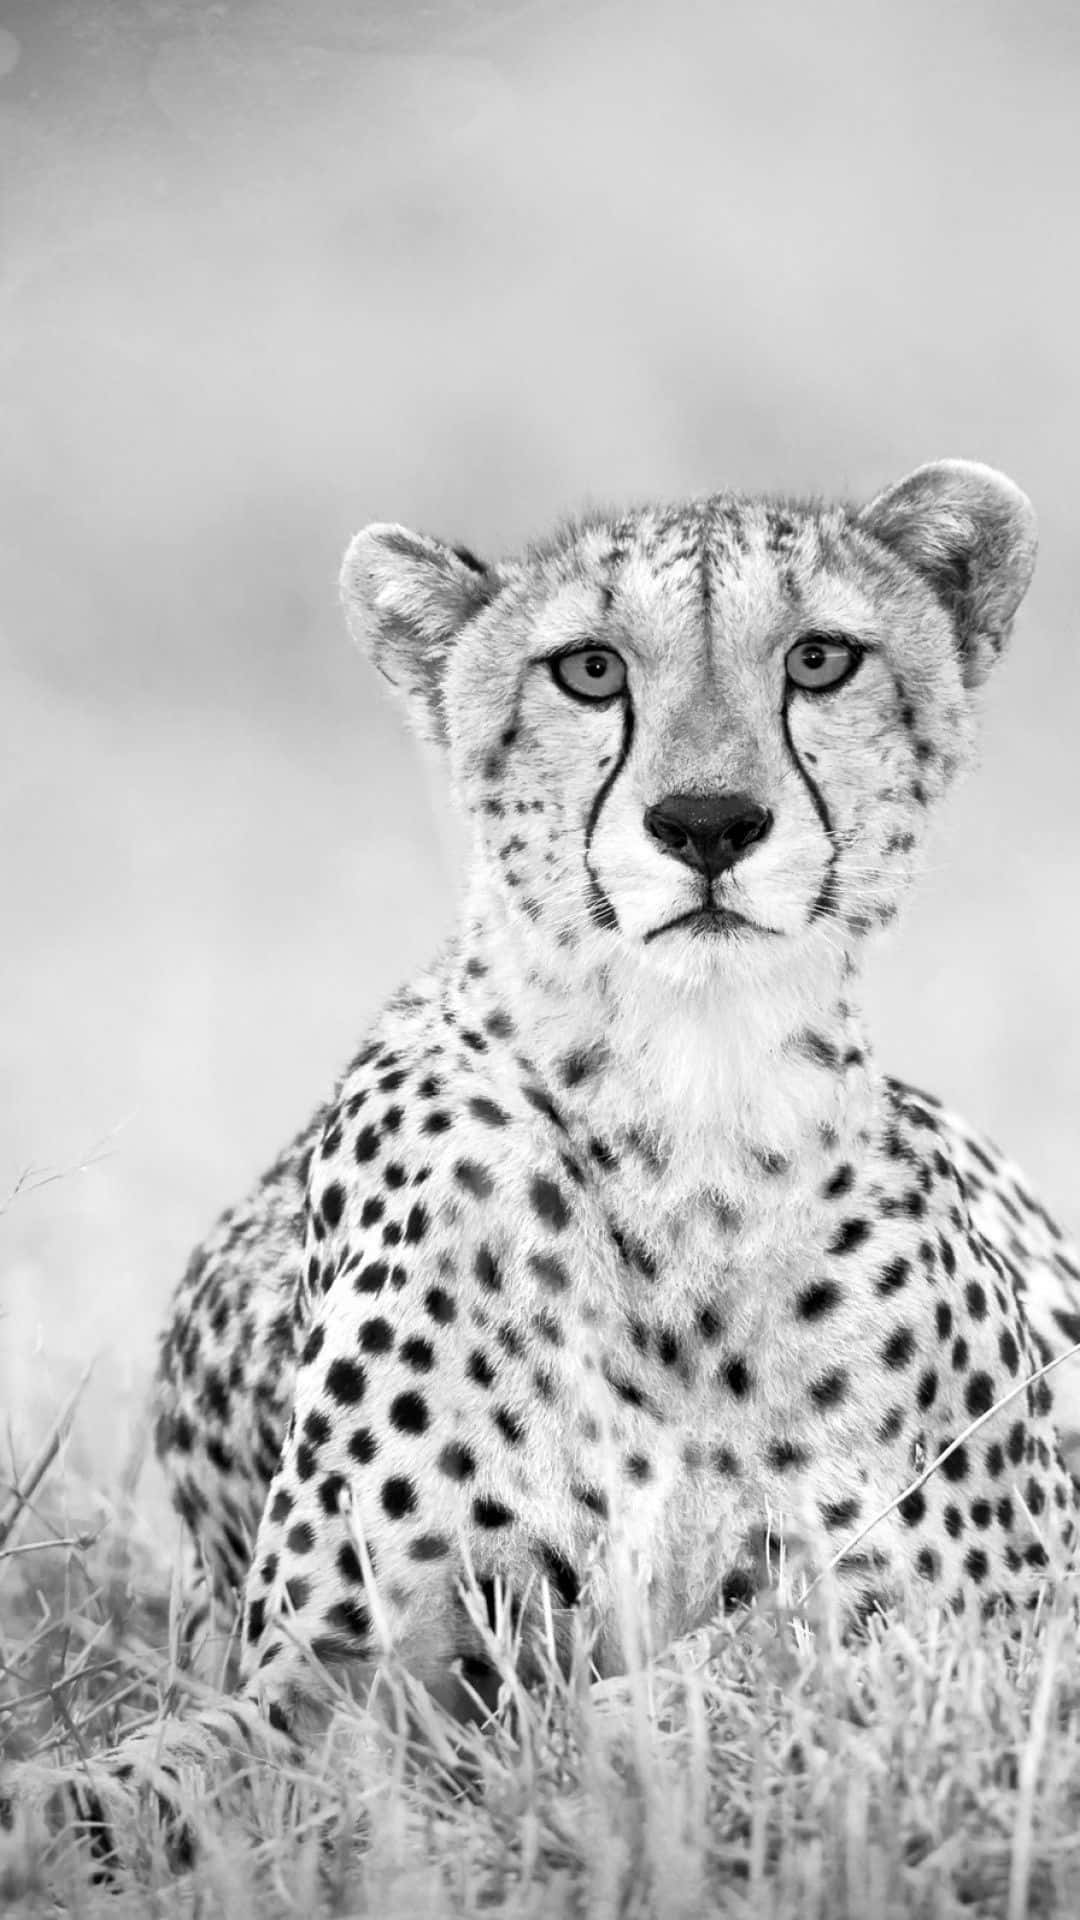 Get the fastest phone around with the sleek and stylish Cheetah Iphone Wallpaper